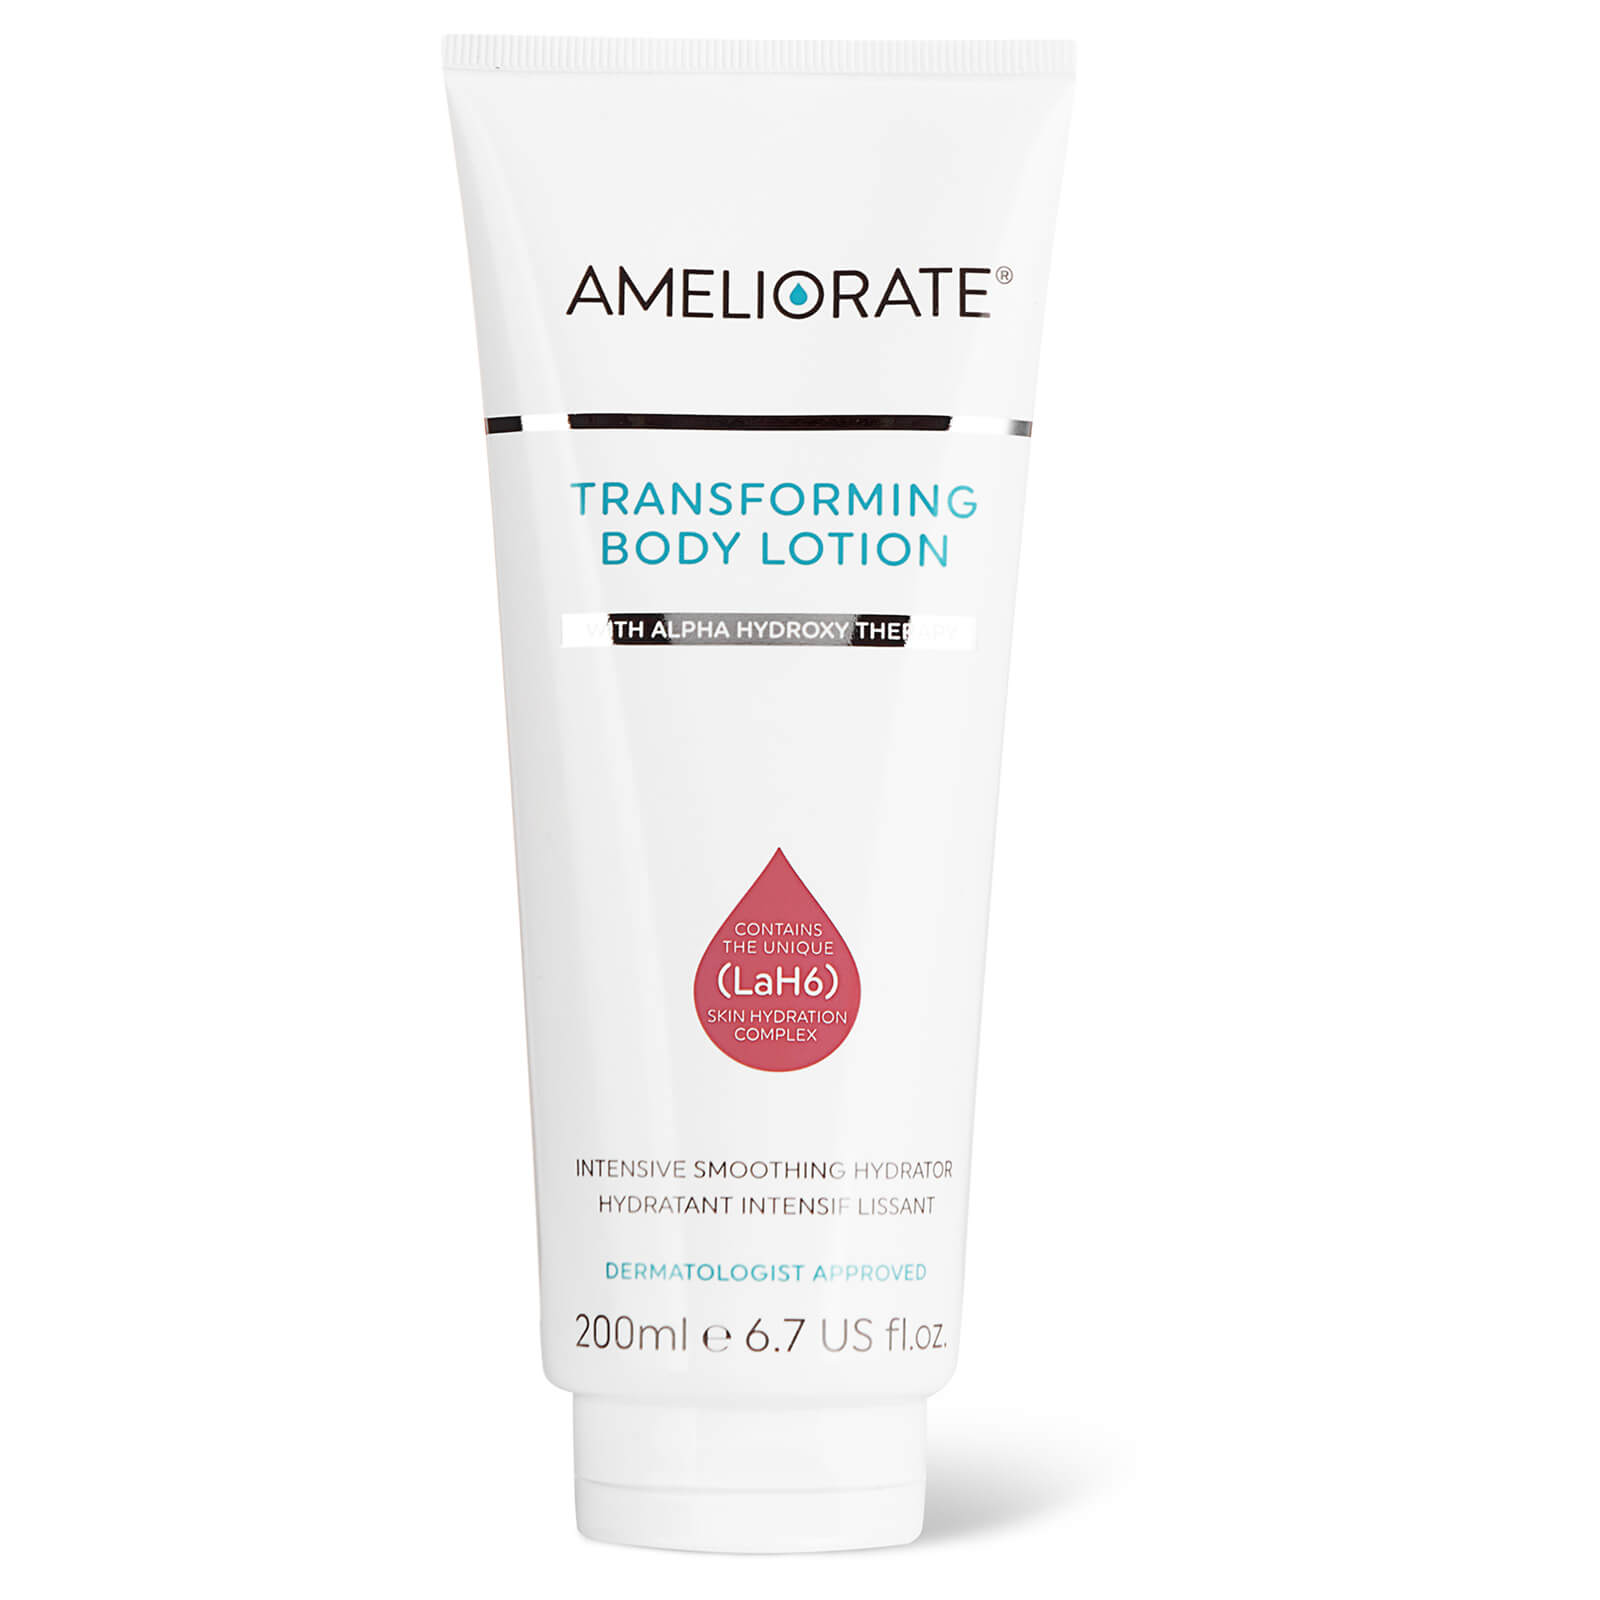 AMELIORATE Transforming Body Lotion - Soft Oriental 200ml